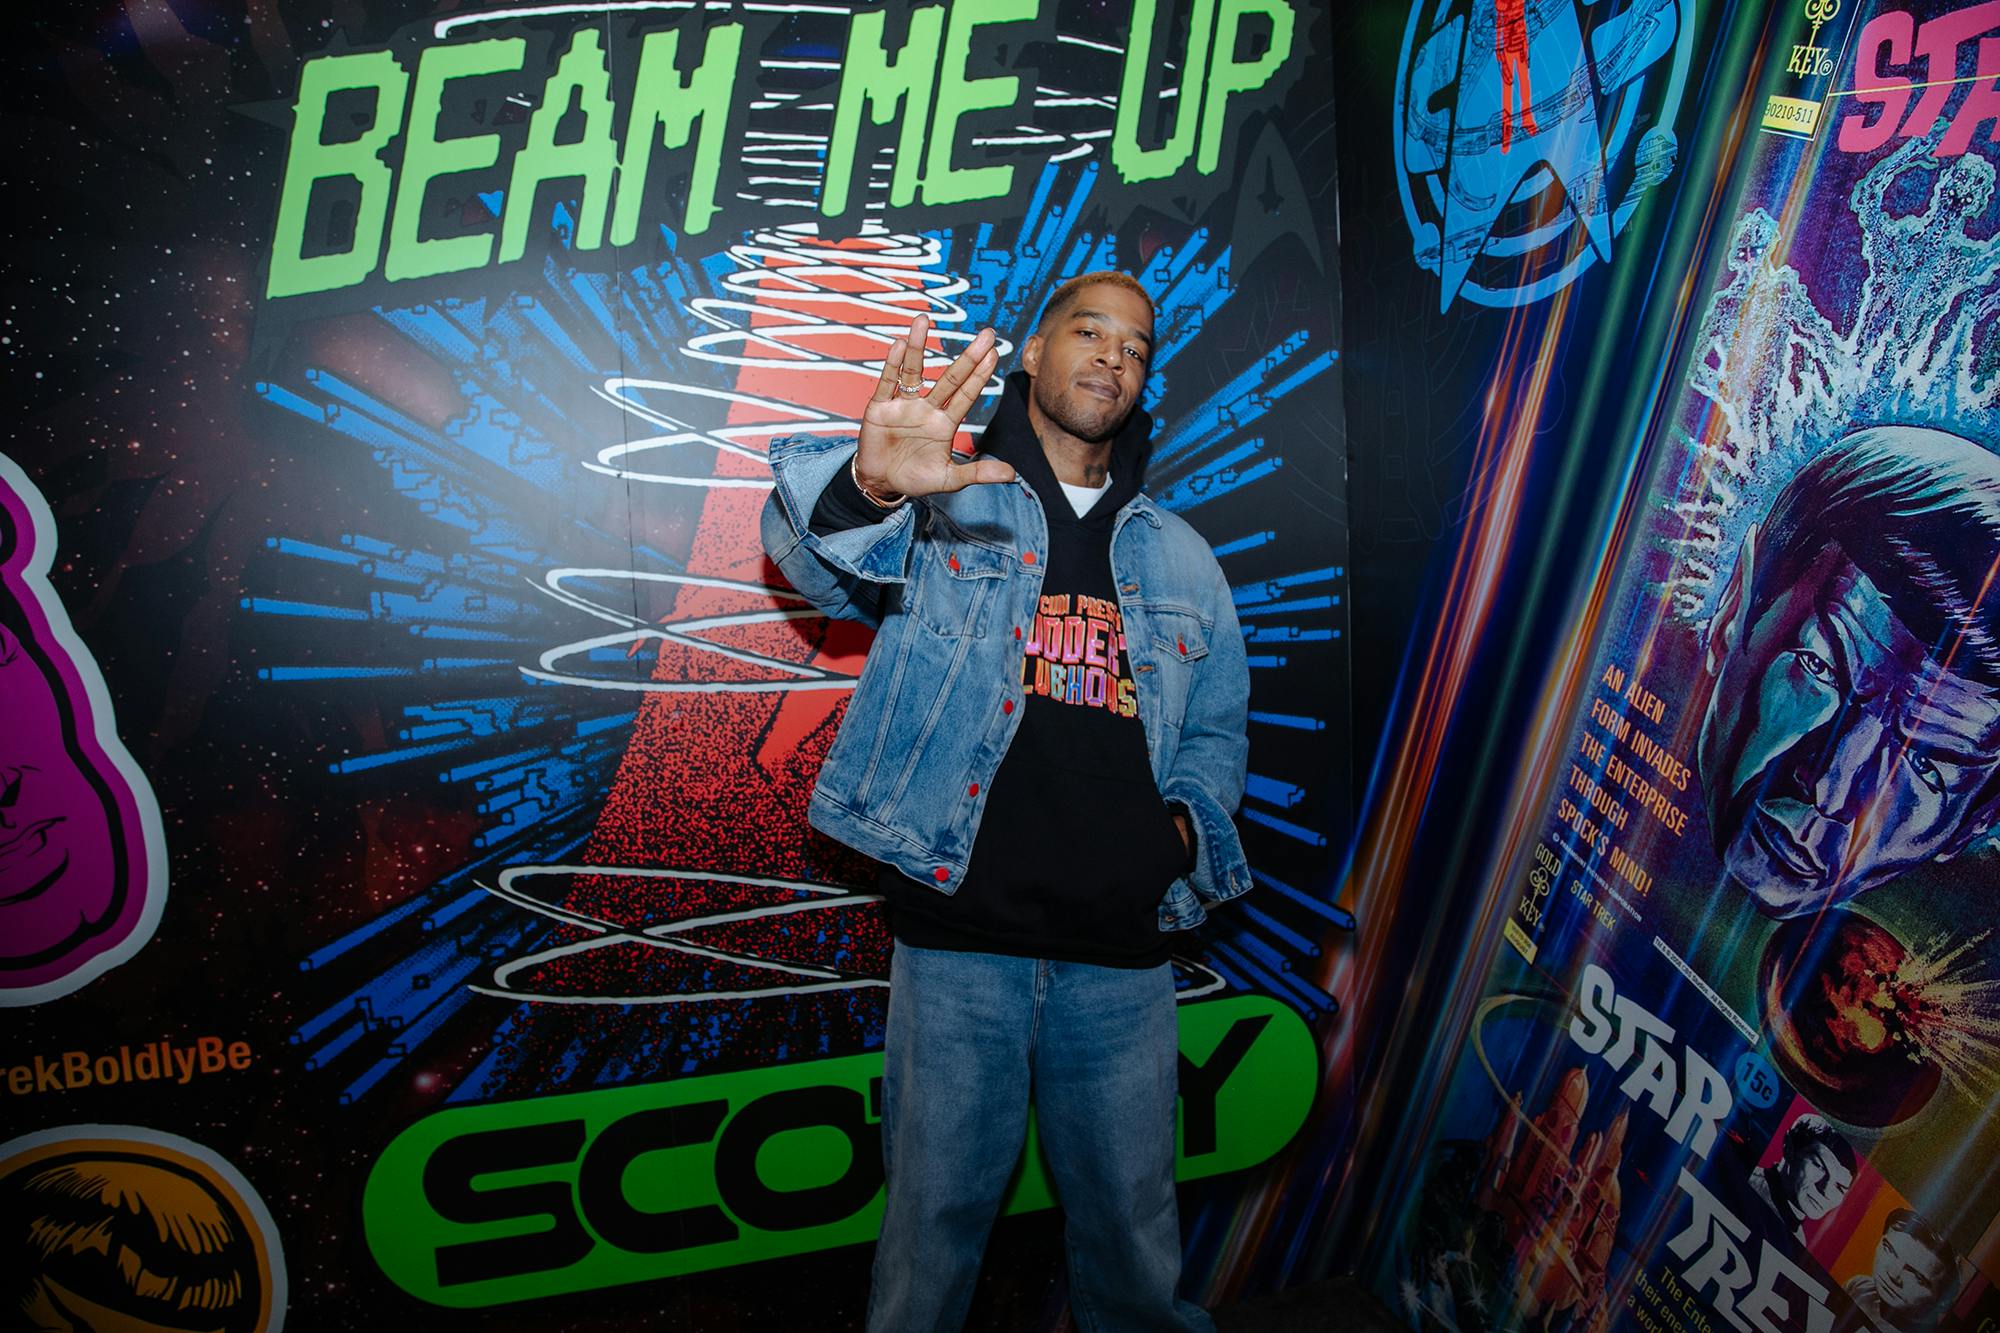 Kid Cudi standing in front of a 'Beam Me Up Scotty' mural holding up the Vulcan salute. 